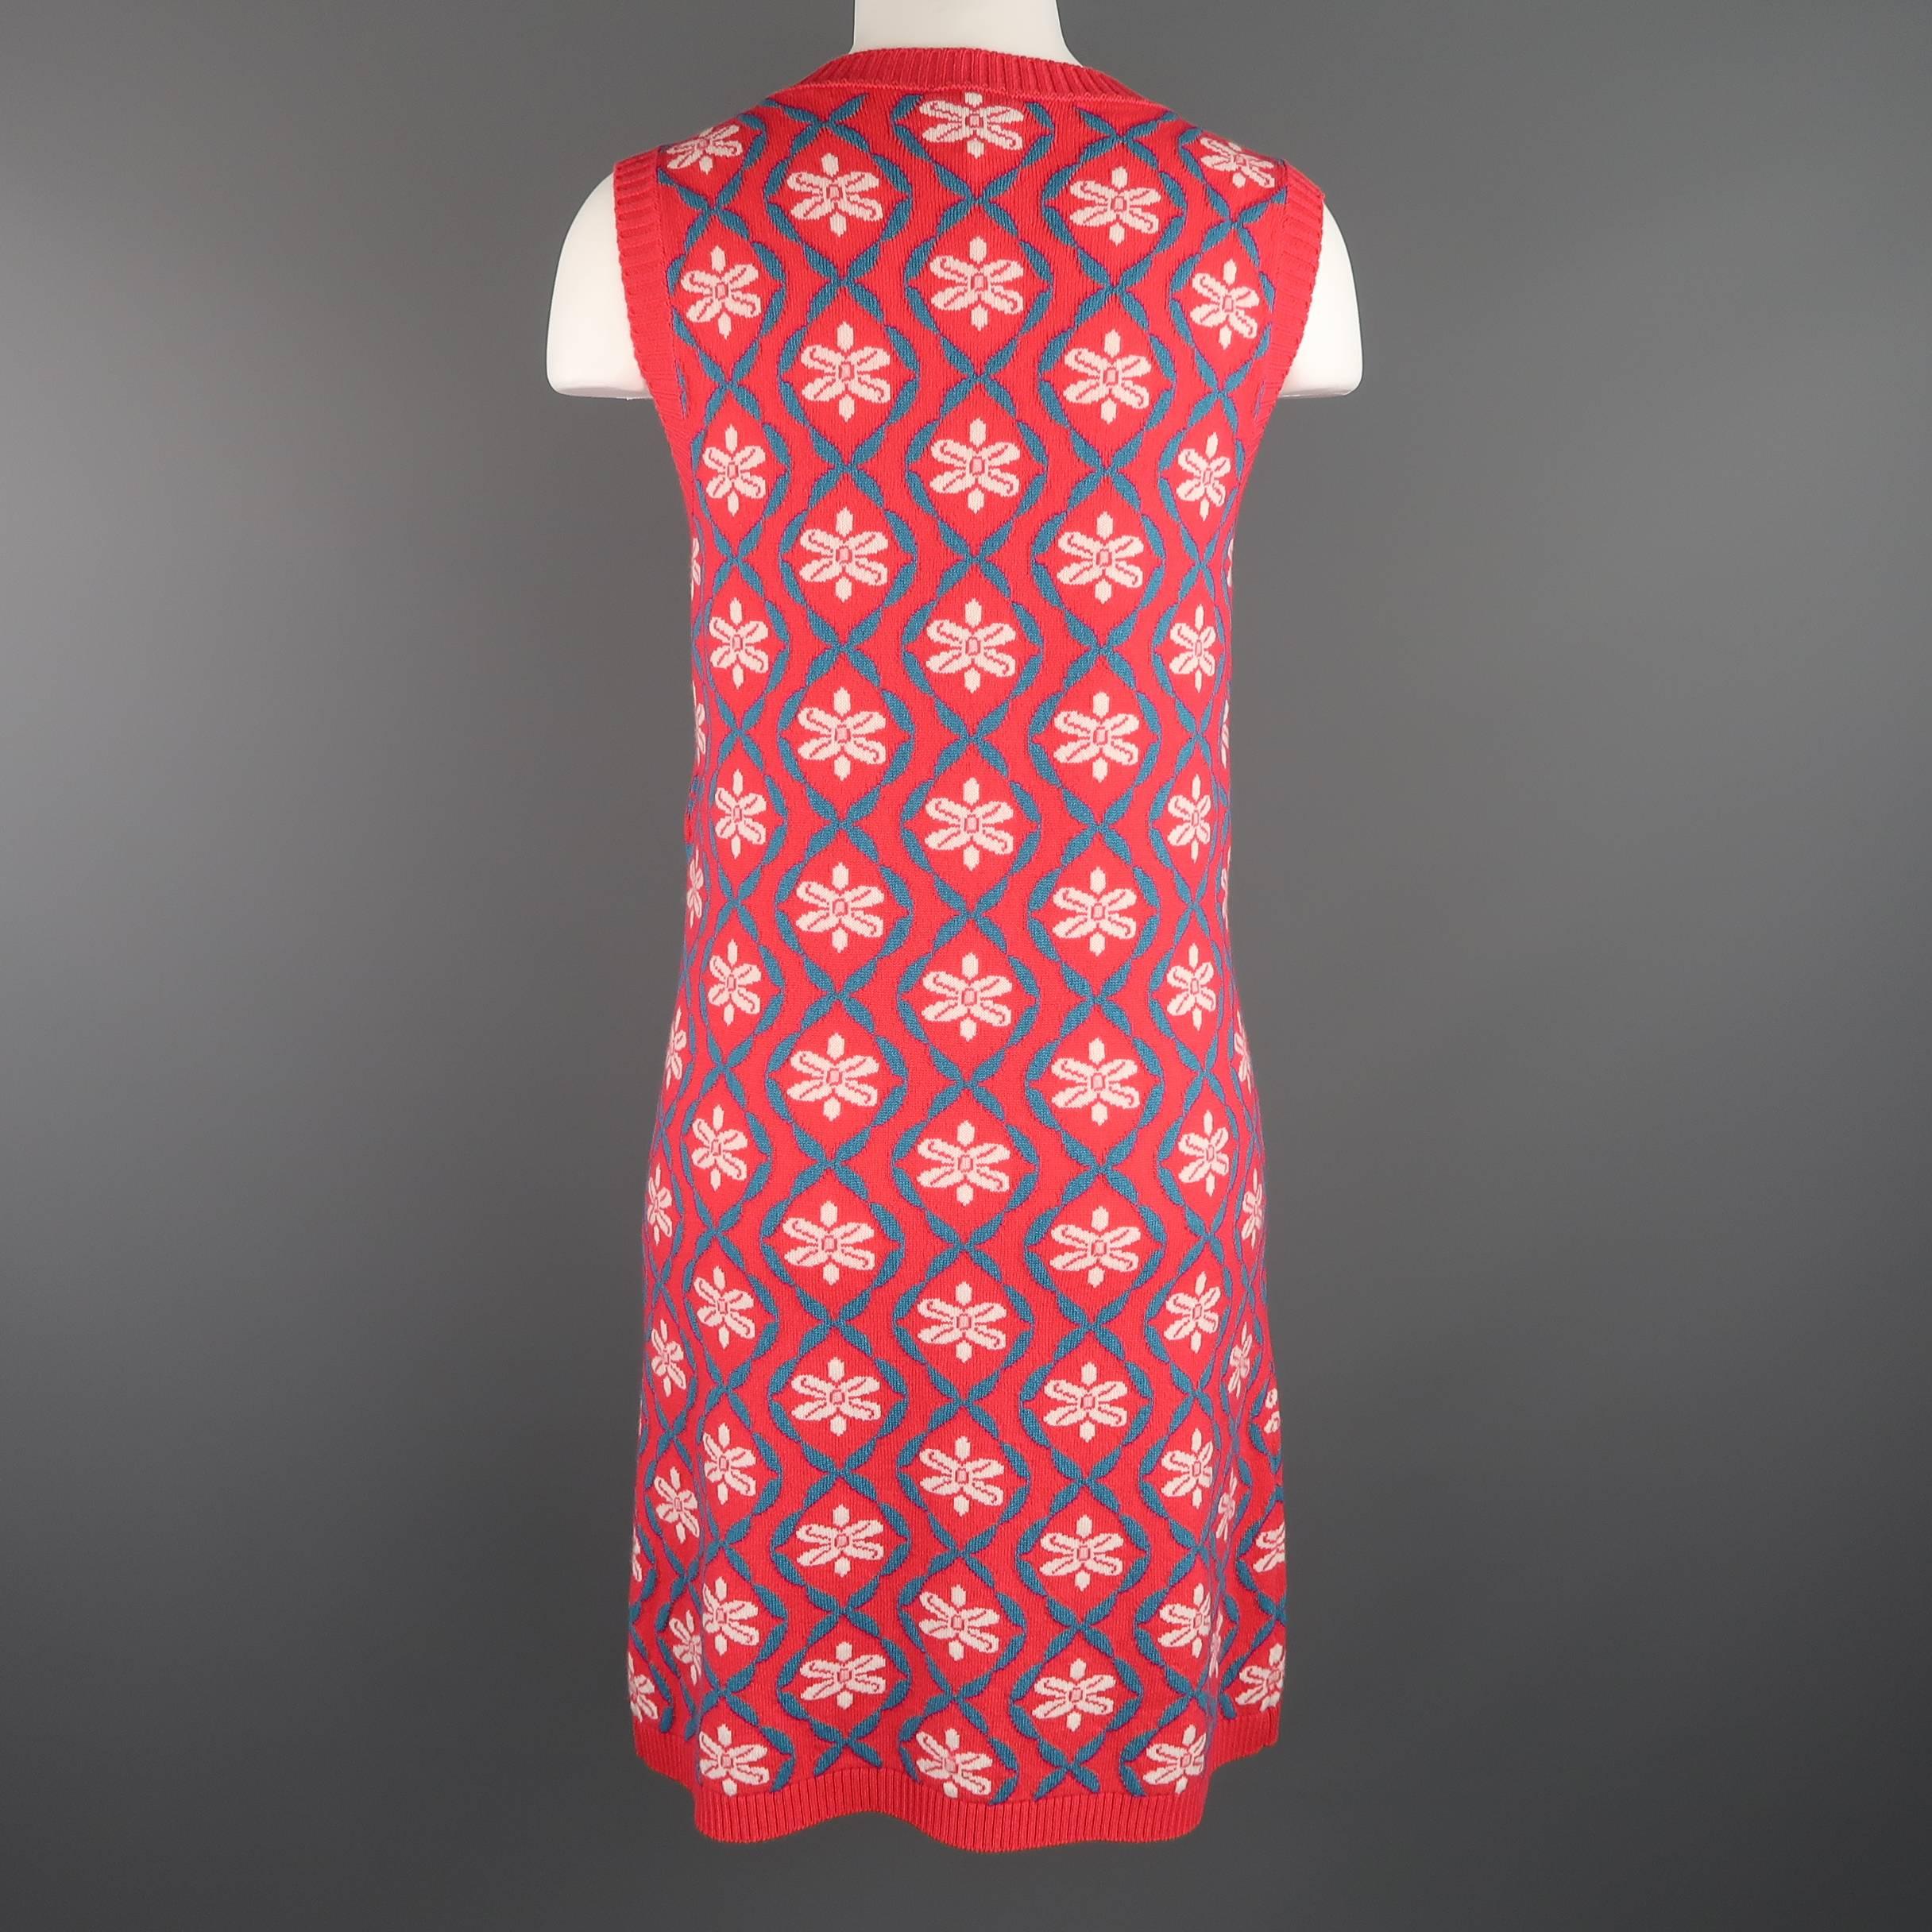 Women's CHANEL Size 4 Coral & Teal Floral Print Cashmere Sleeveless Shift Sweater Dress